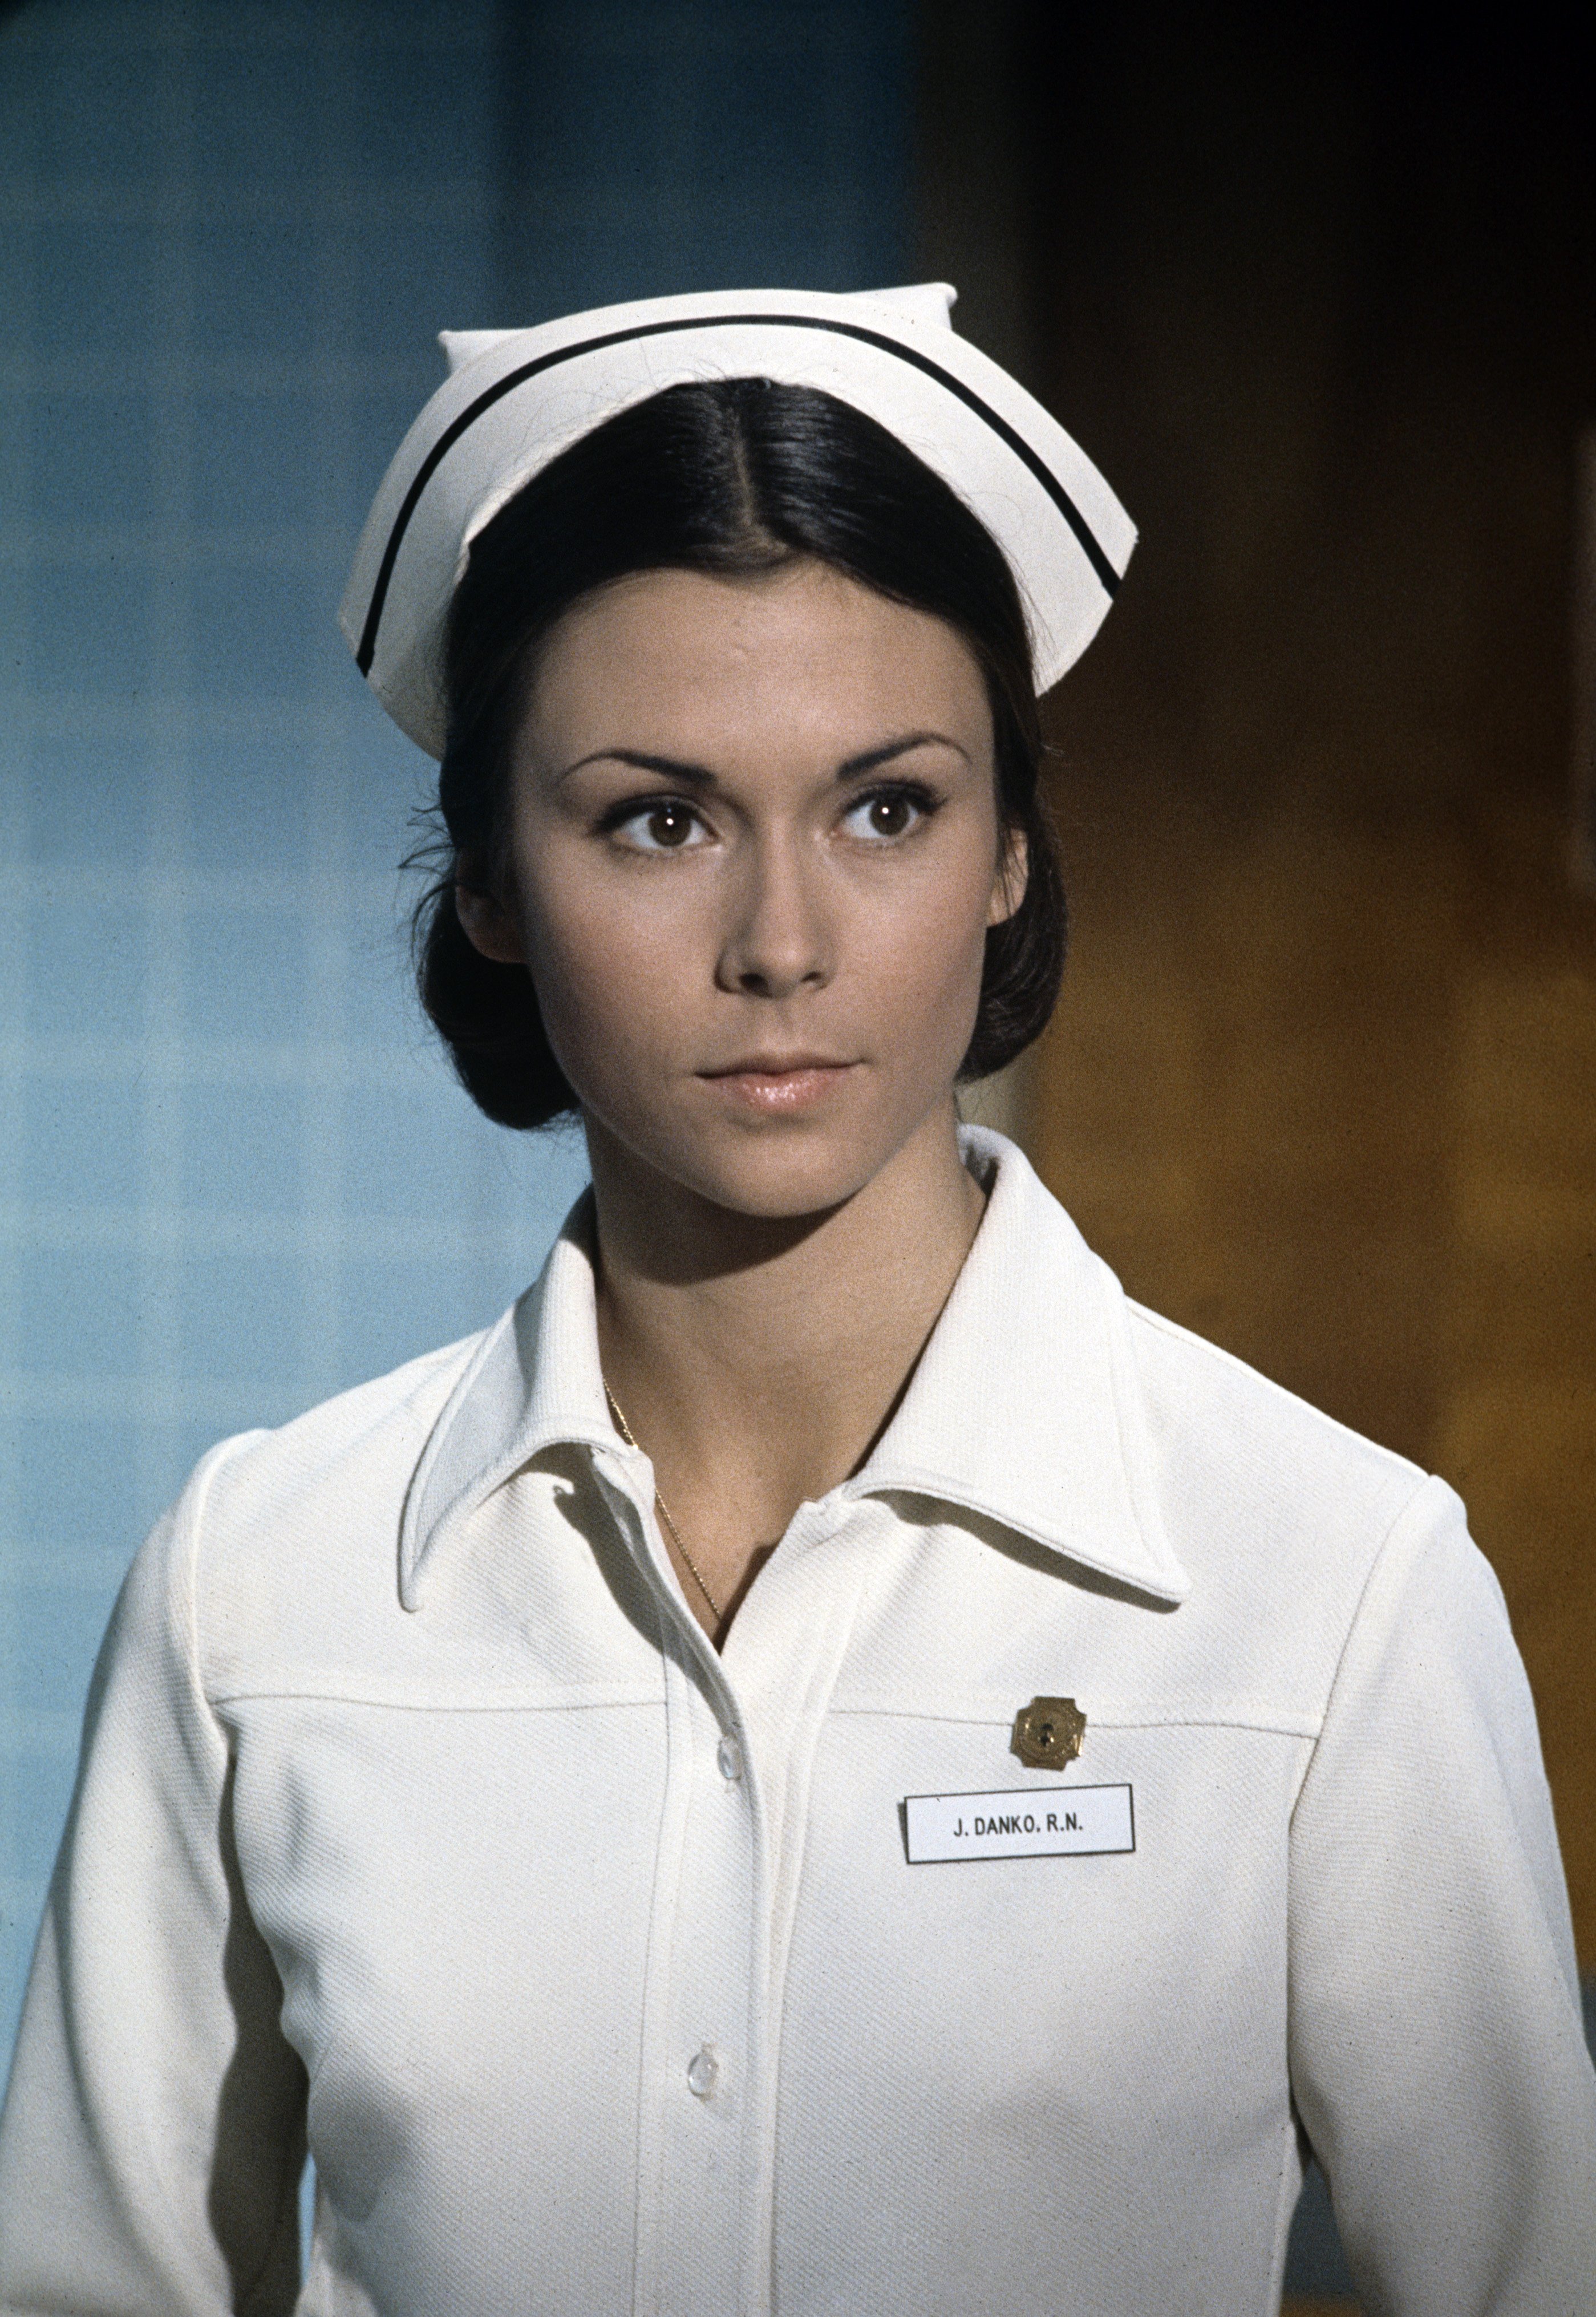  Kate Jackson as a nurse on the set of "The Rookie" on August 1, 1972. | Source: Getty Images